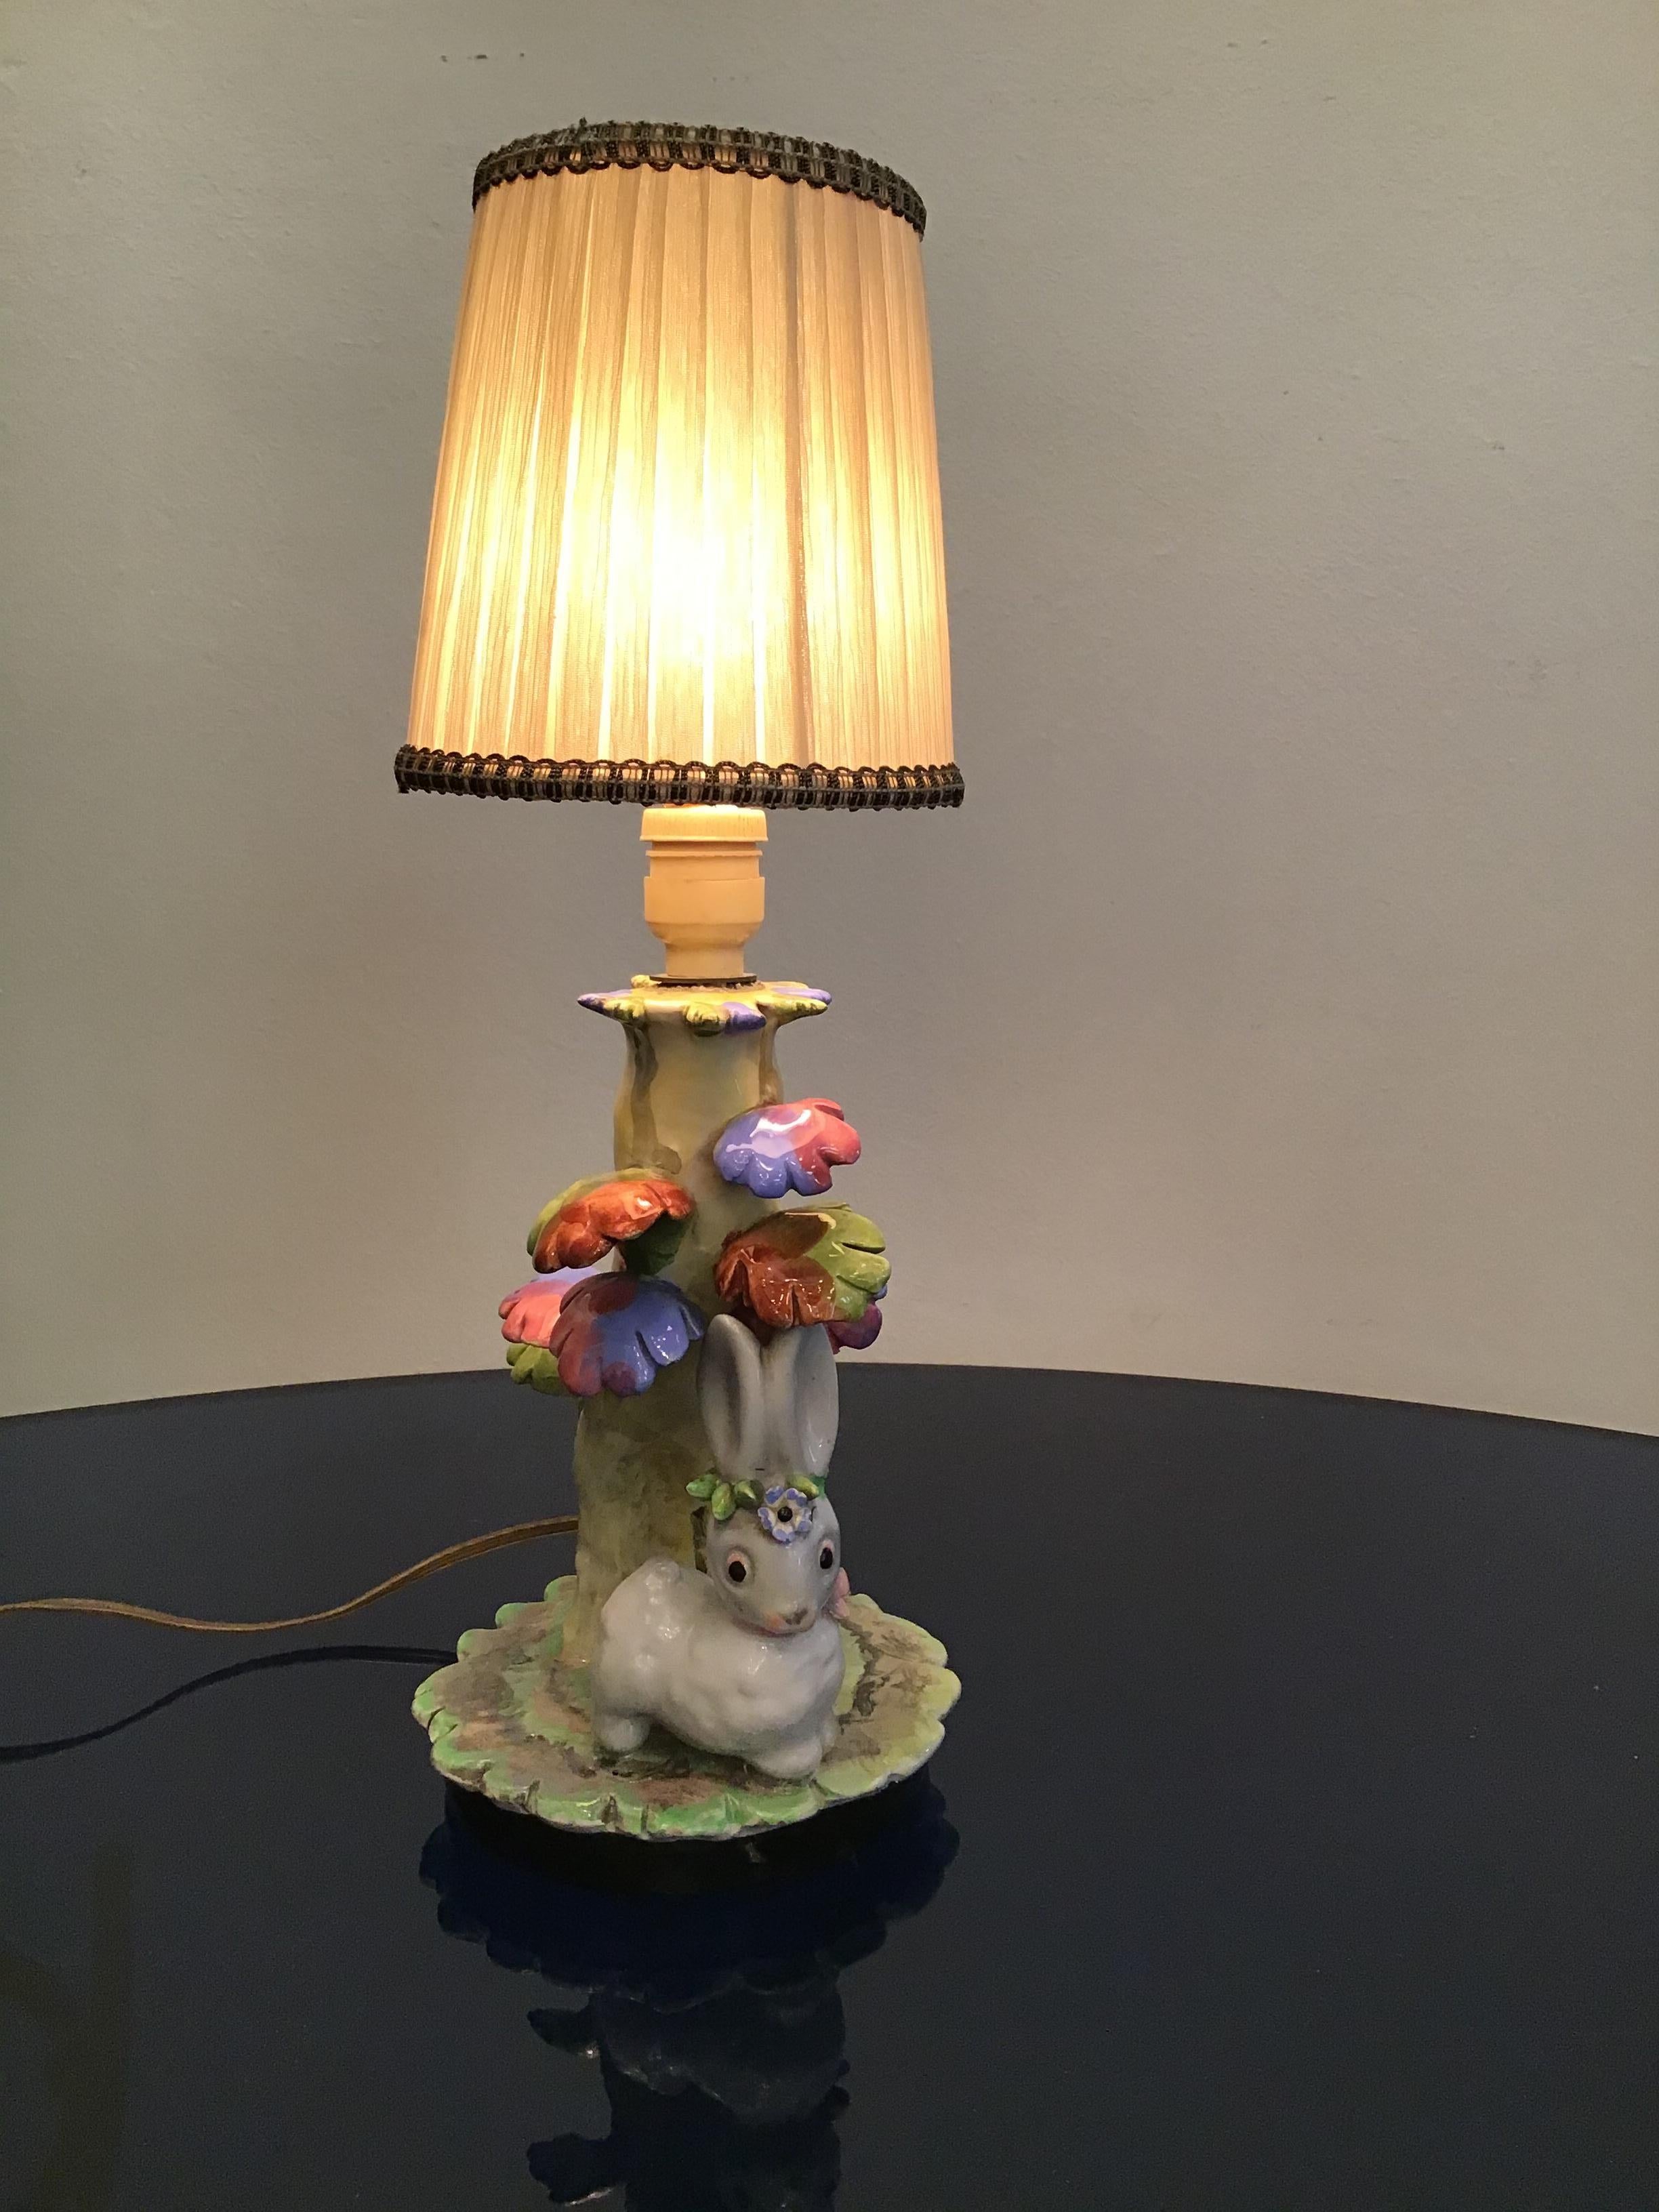 Mid-20th Century Tosin Table Lamp Ceramic Fabric Lampshade 1930, Italy For Sale